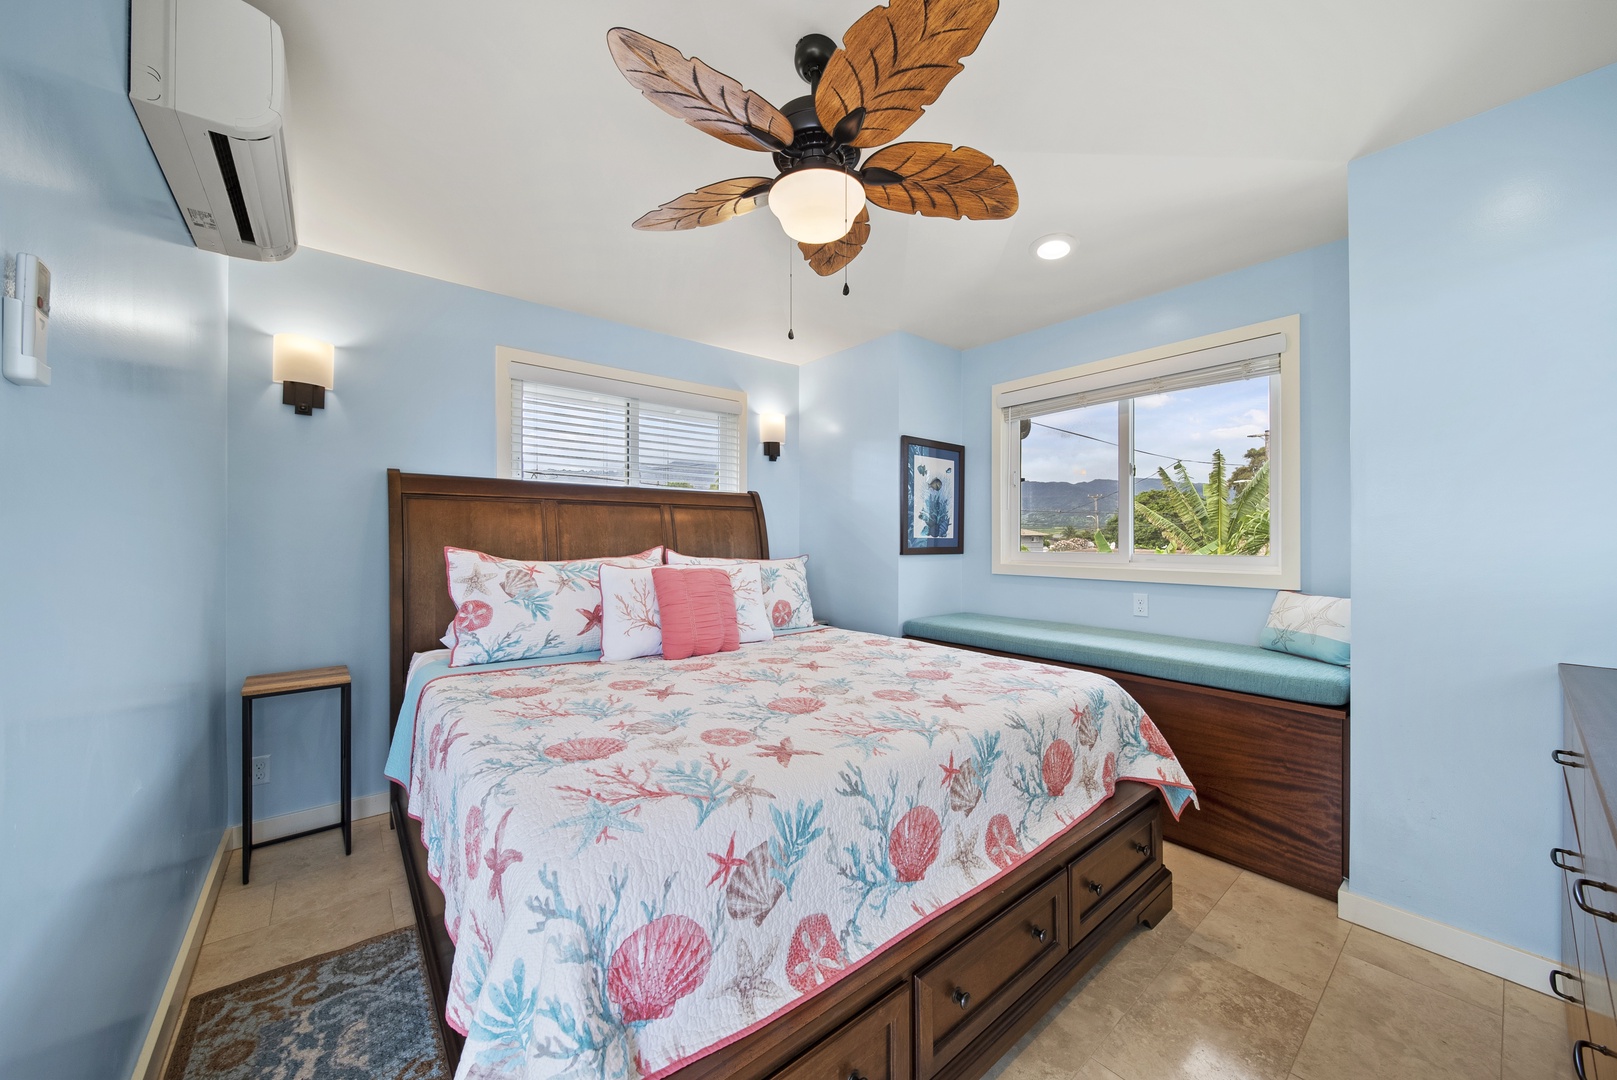 Waialua Vacation Rentals, Waialua Beachside Cottage - Stay cool with the split AC unit or many windows that allow the ocean breezes to flow through.